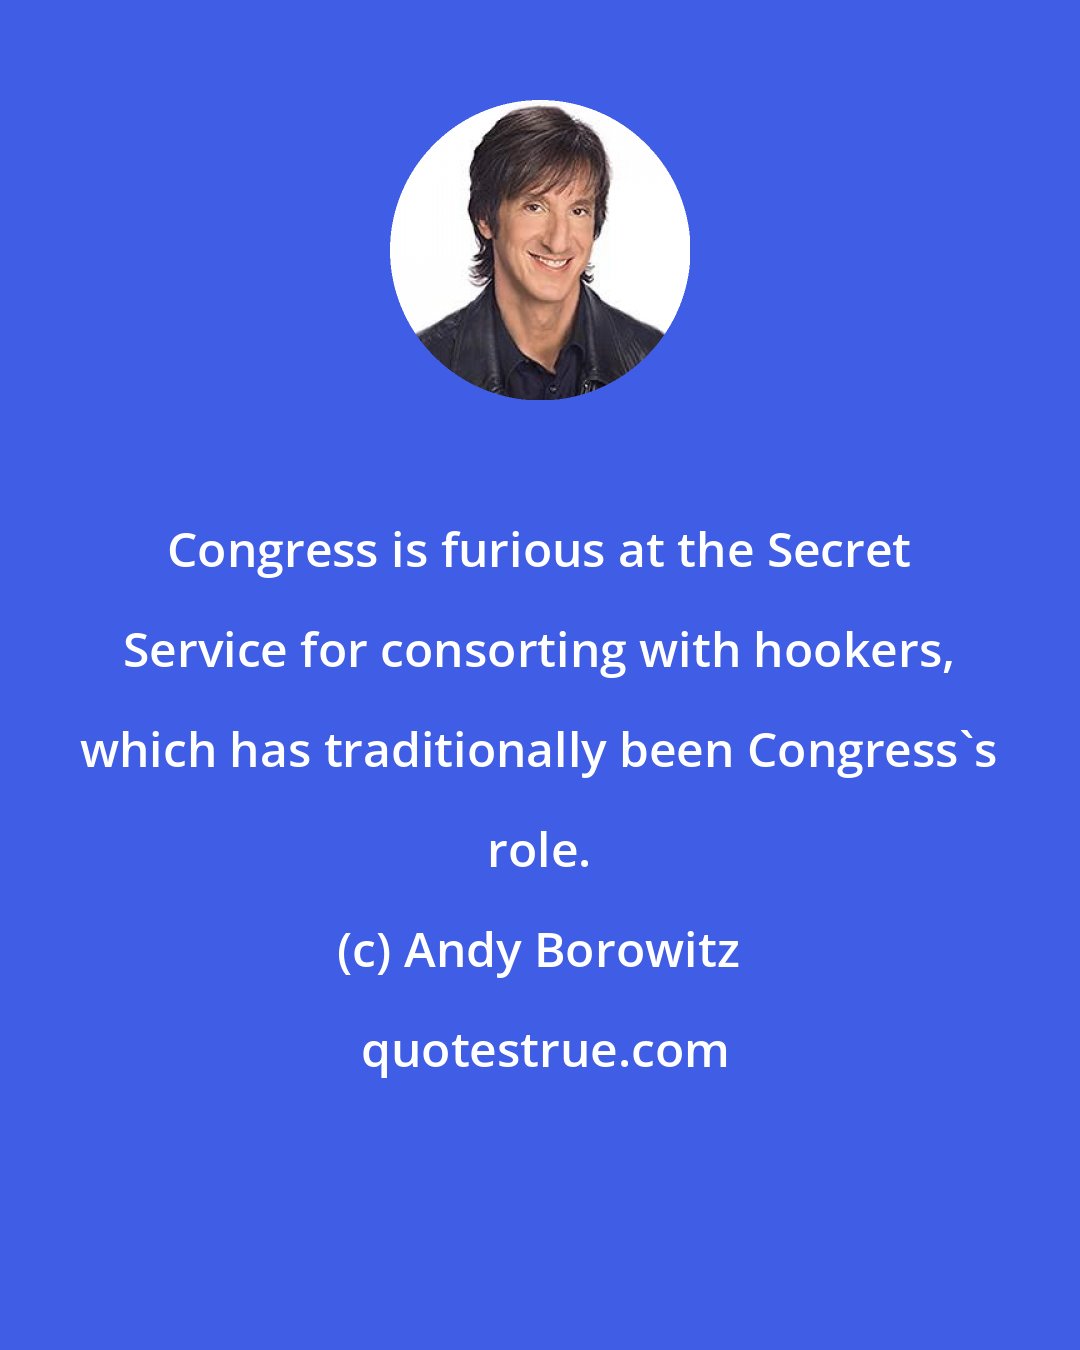 Andy Borowitz: Congress is furious at the Secret Service for consorting with hookers, which has traditionally been Congress's role.